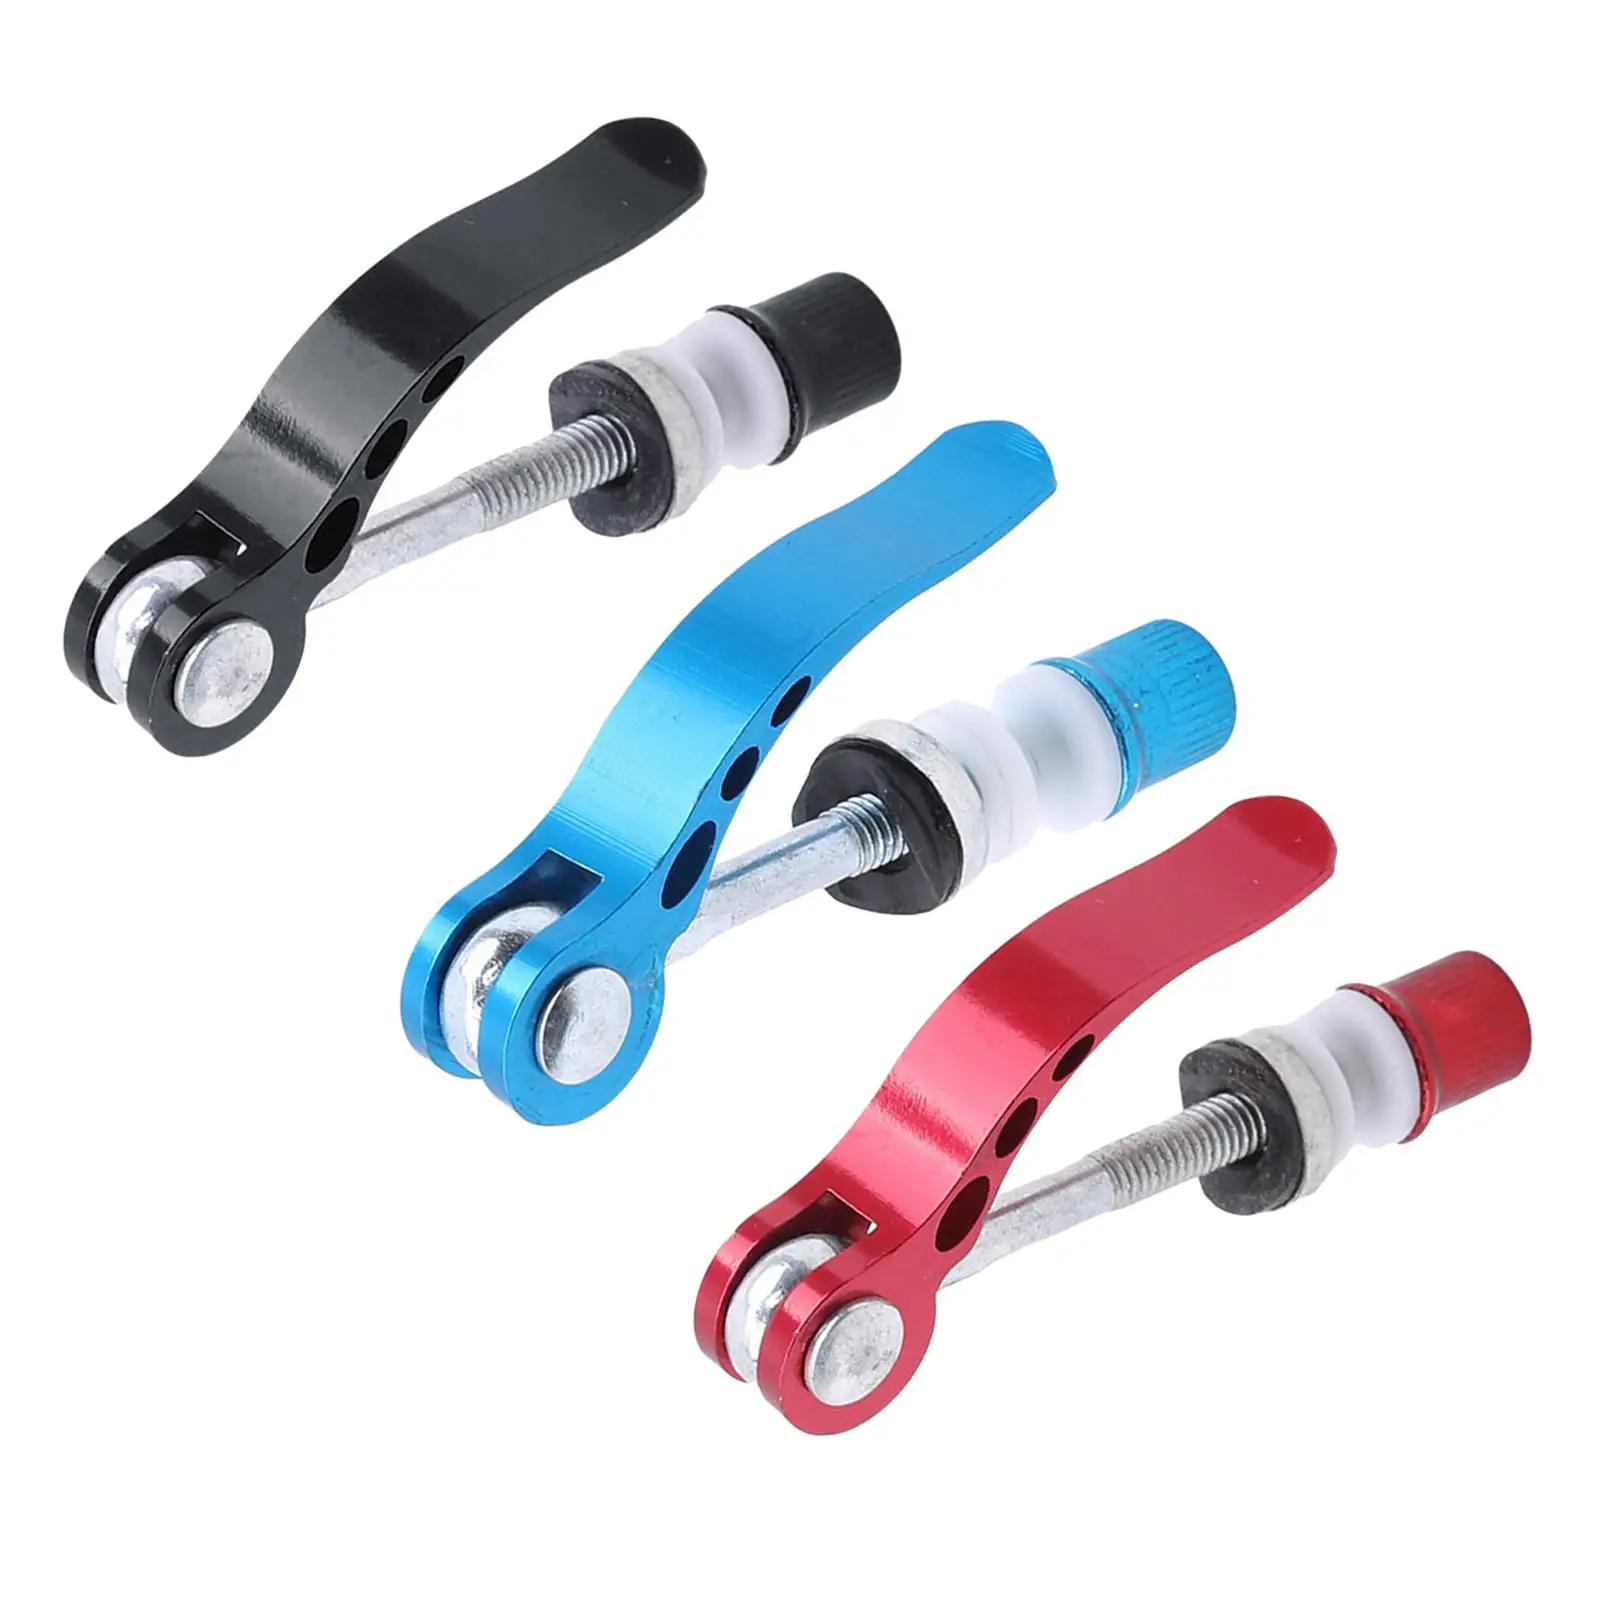 Bike Seatpost Clamp Bicycle Seatpost Clamp Tube Clamp Release Seatposts Clamp